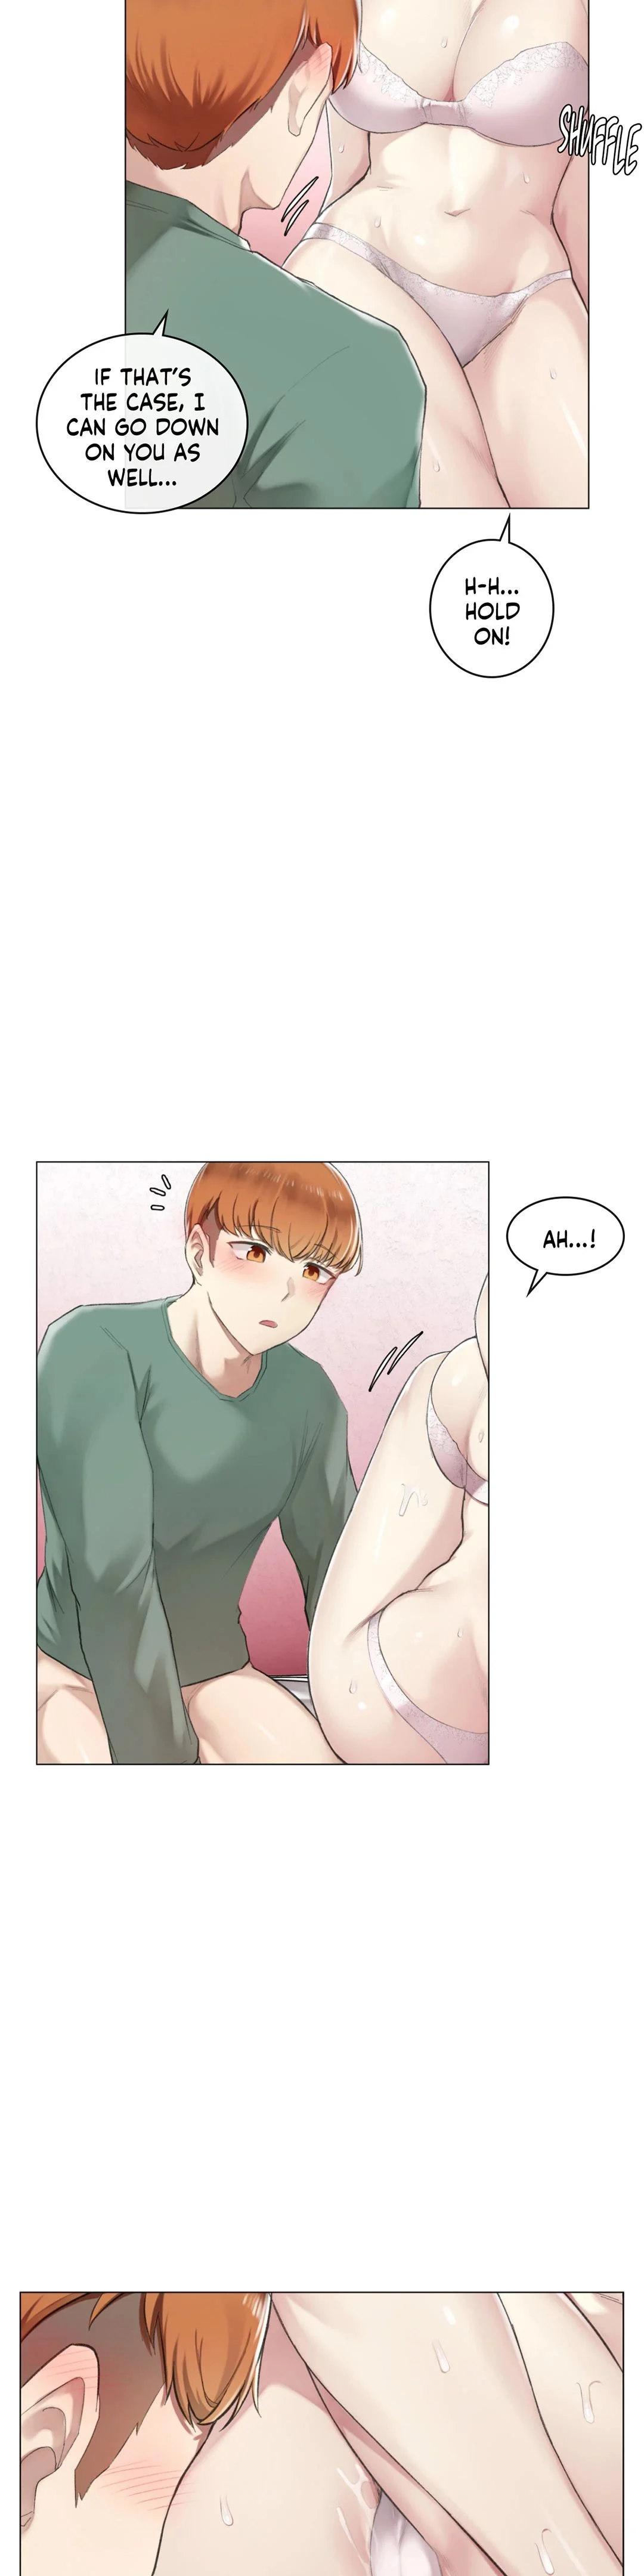 [Dumangoon, KONG_] Sexcape Room: Snap Off Ch.7/7 [English] [Manhwa PDF] Completed 73